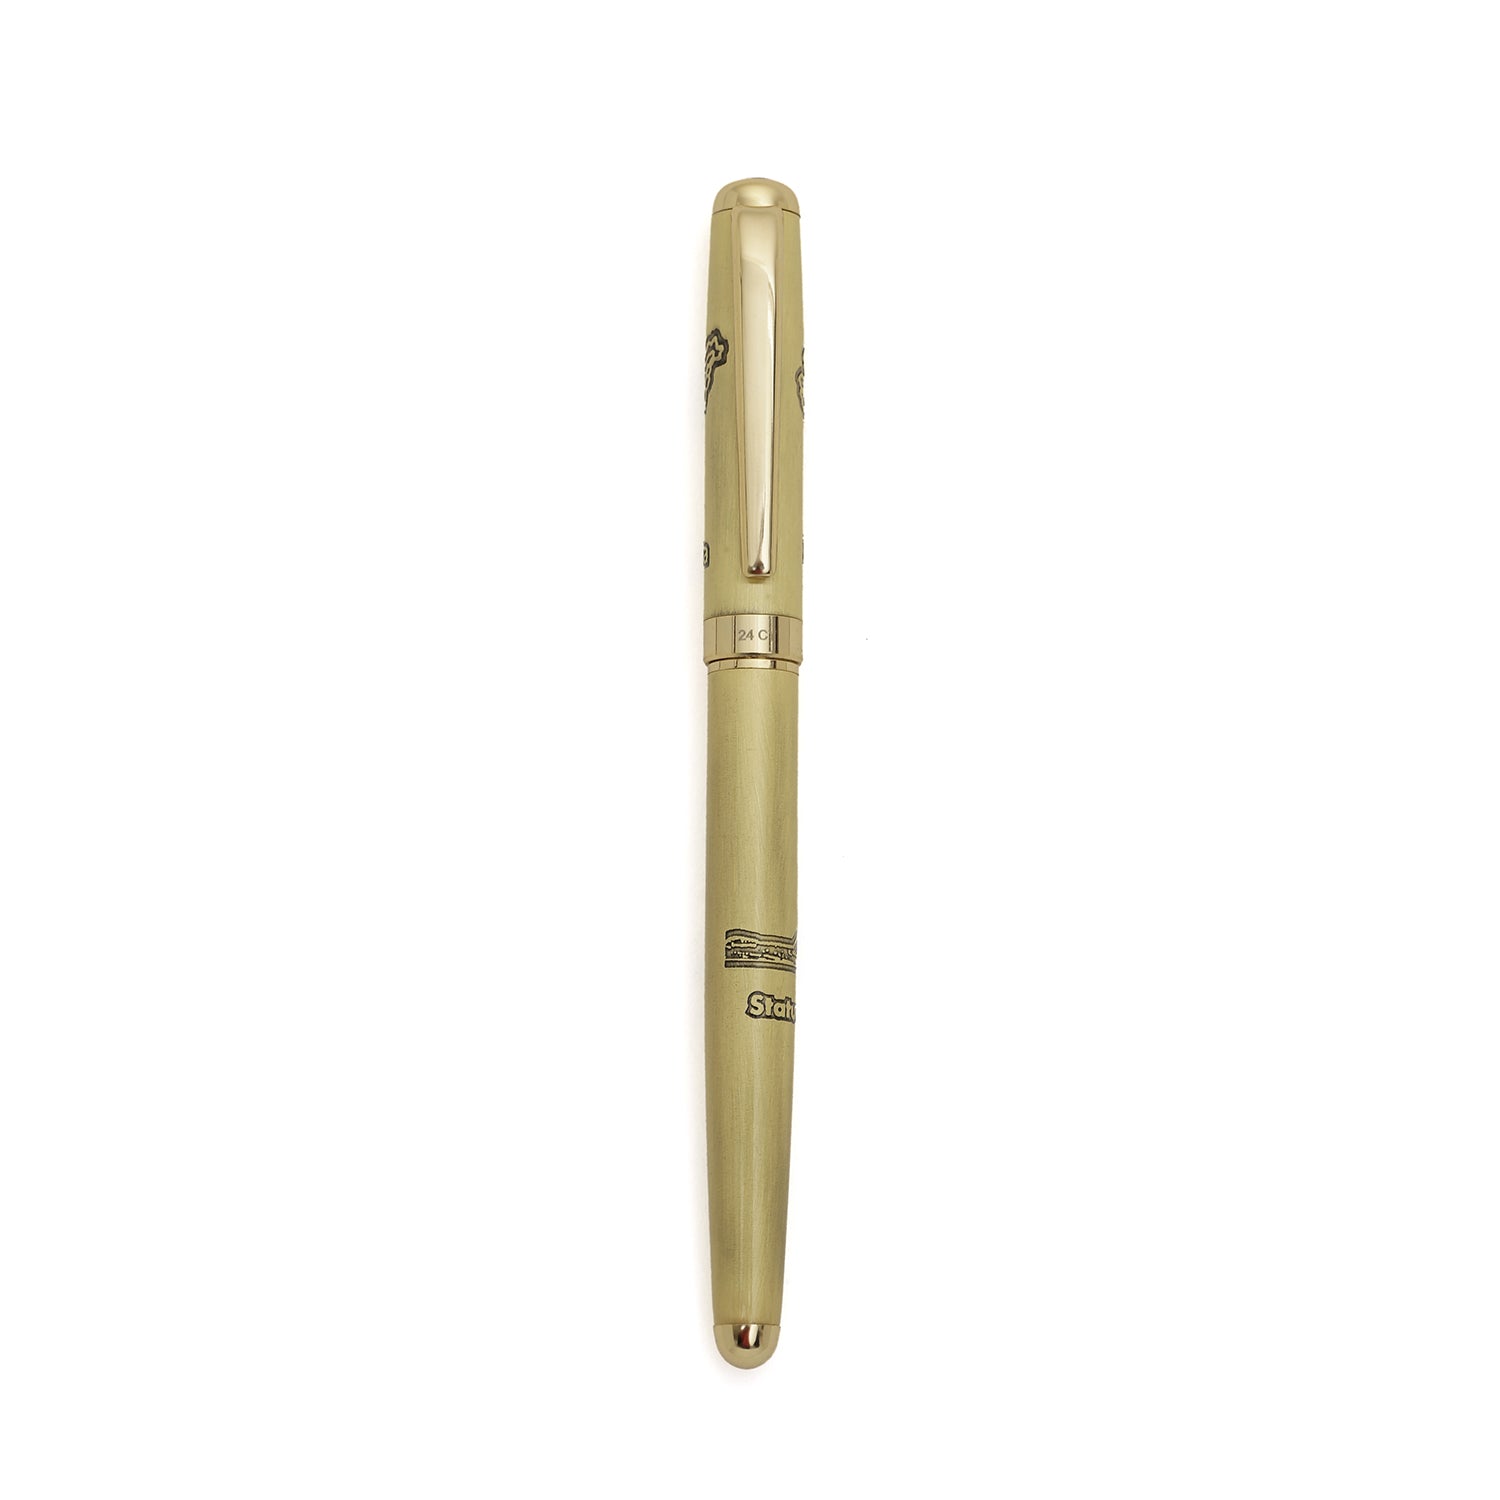 Hayman 24 CT Gold Plated statue of unity Engraved Roller Ball Pen with Box (P-131) - Hayman Pen 